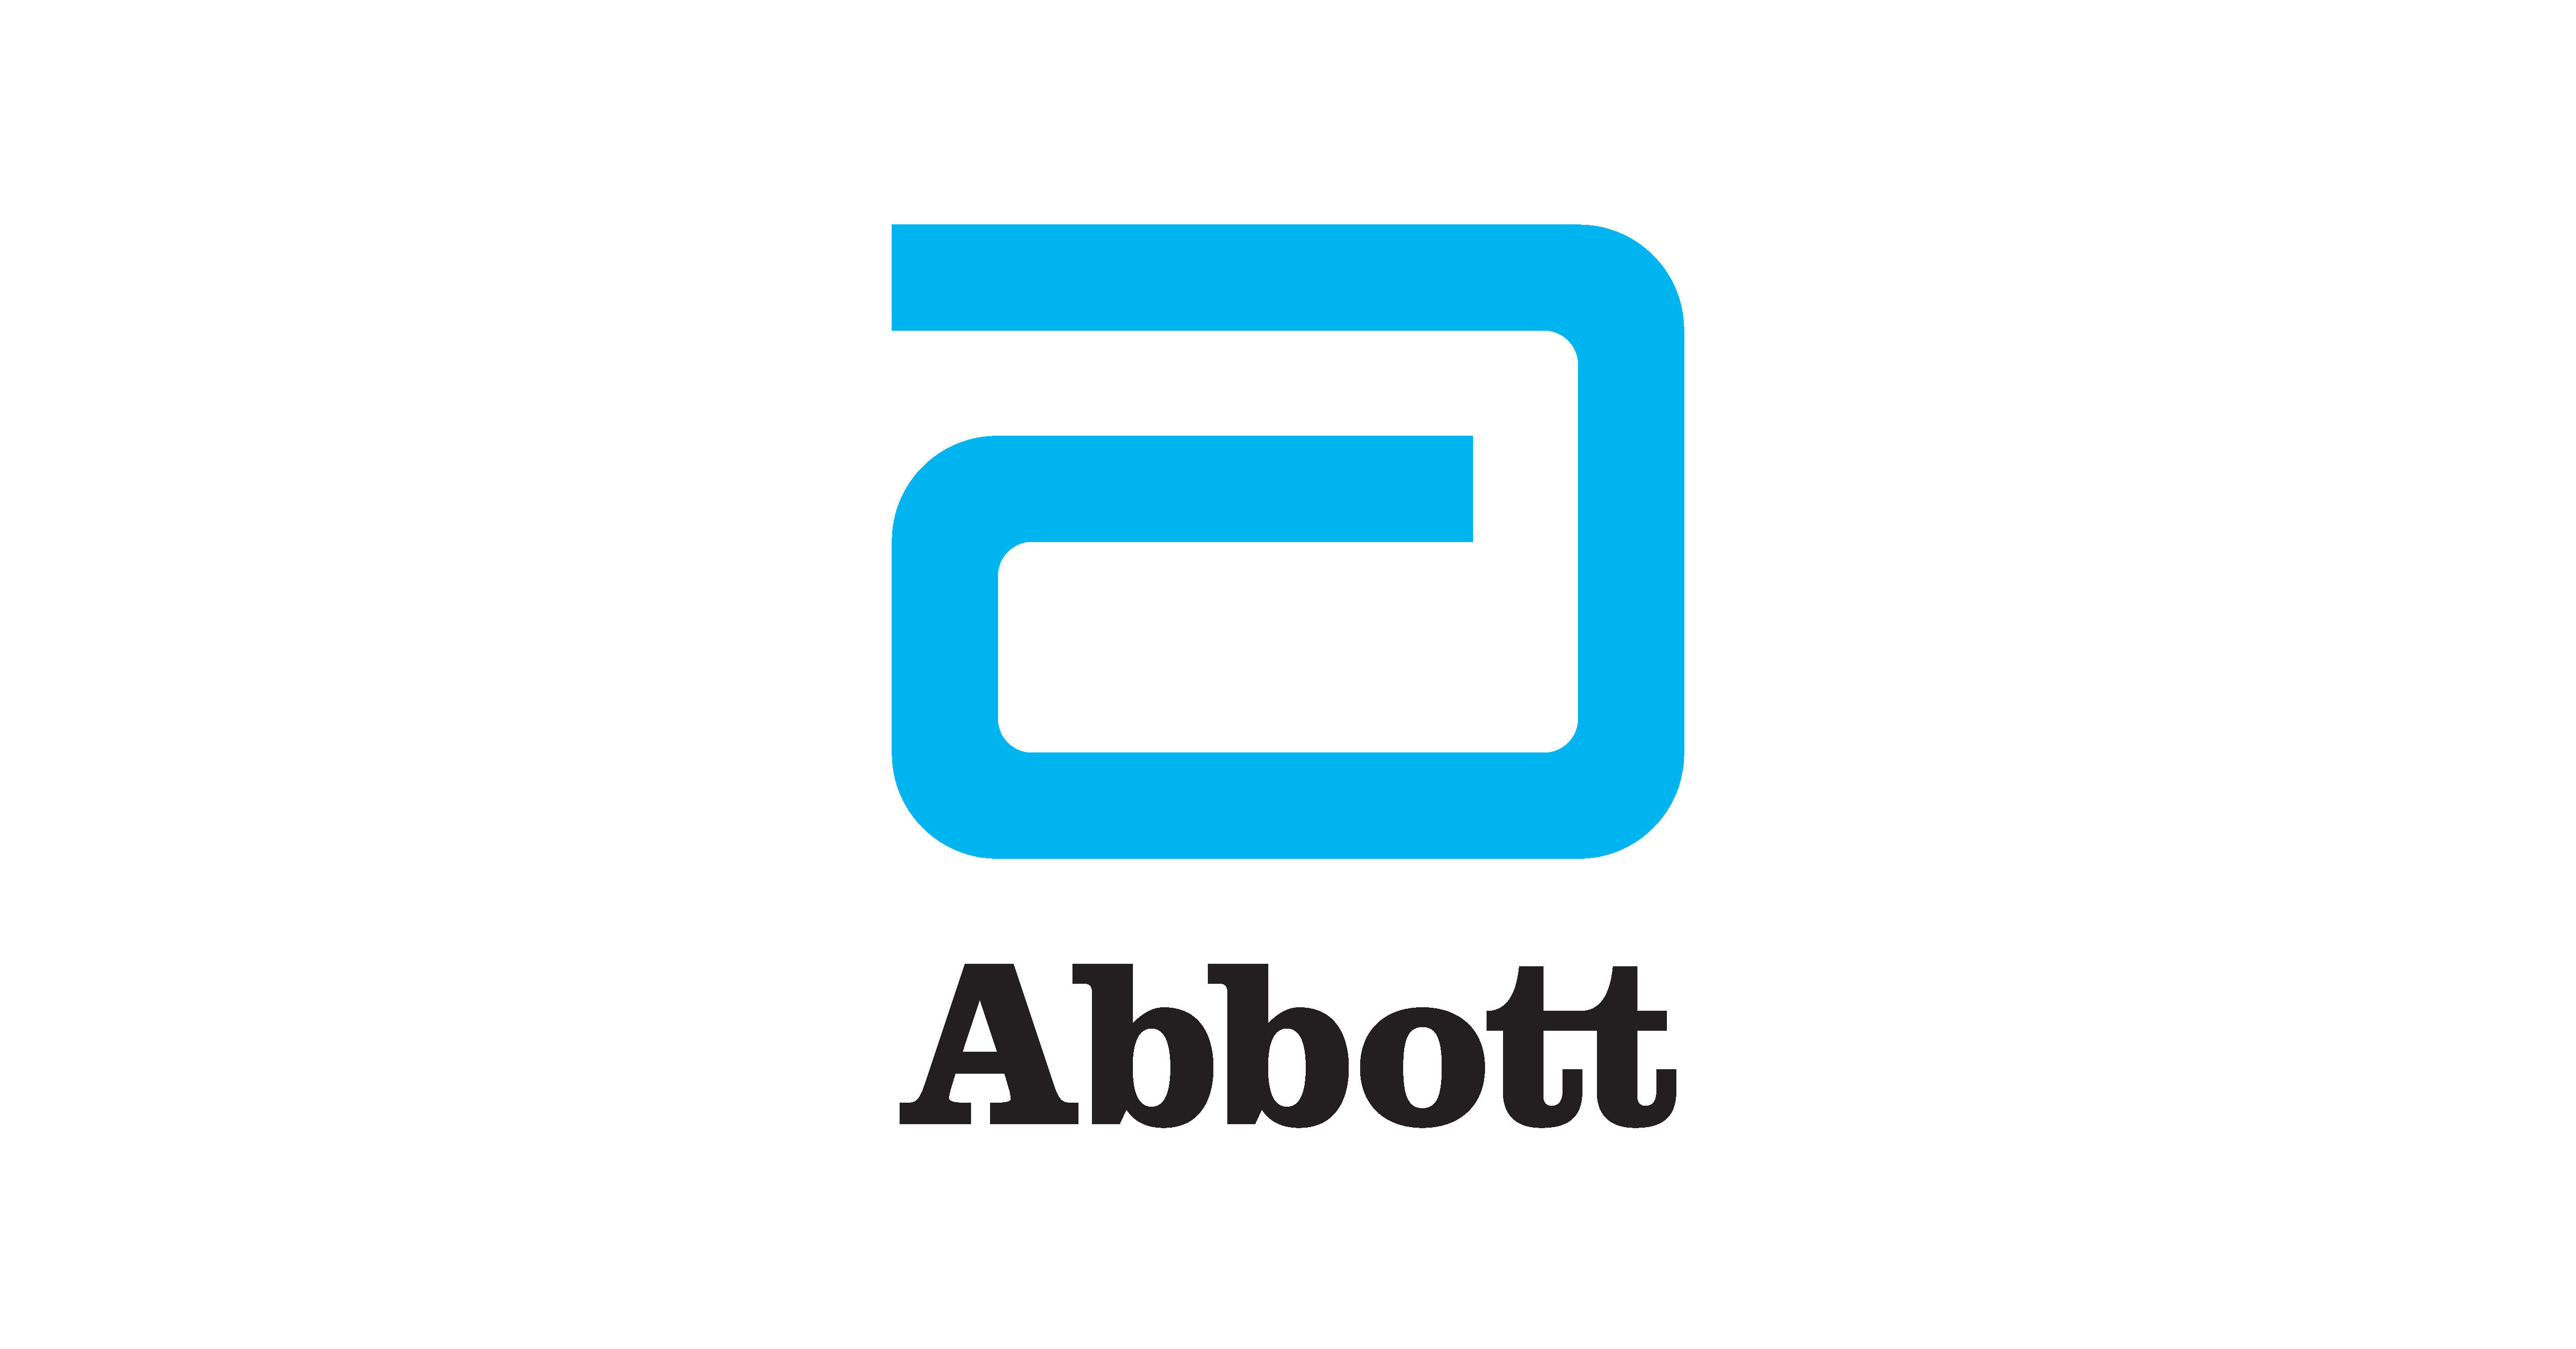 Abbott Receives Three CES 2023 Innovation Awards for Advancements in Health Technology